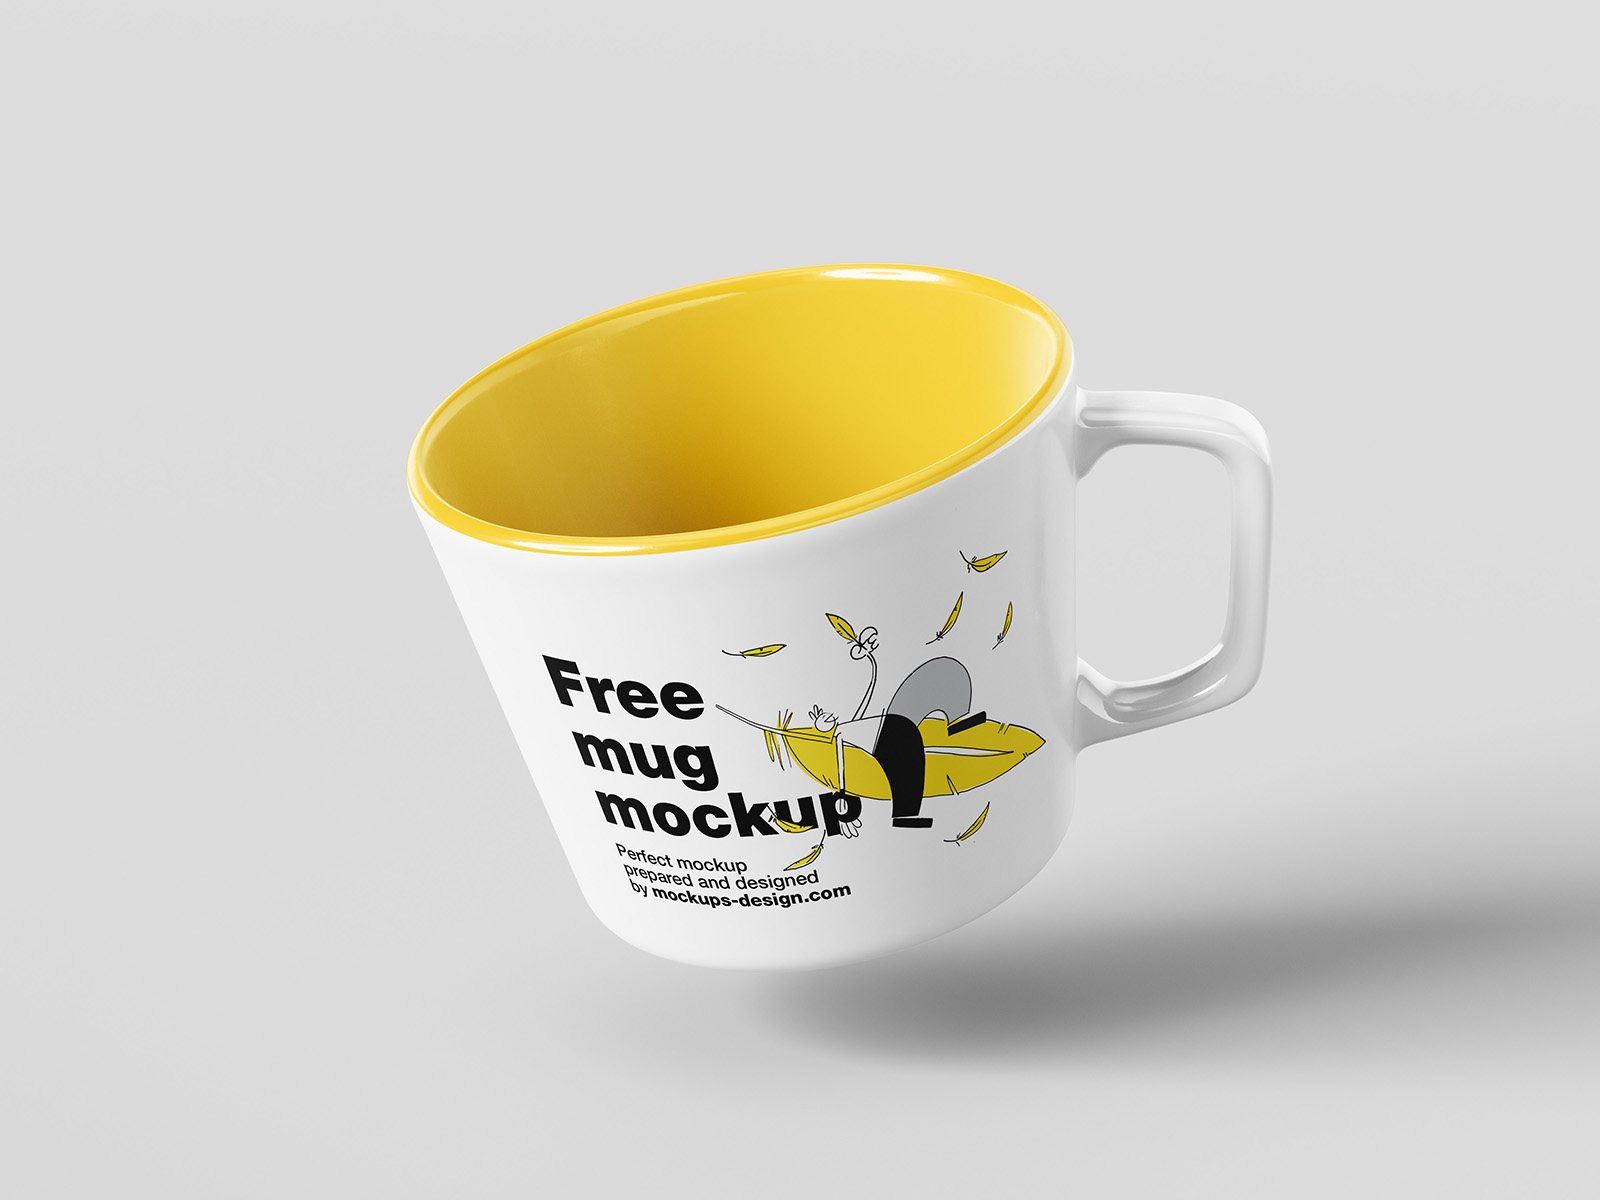 Low cup mockup